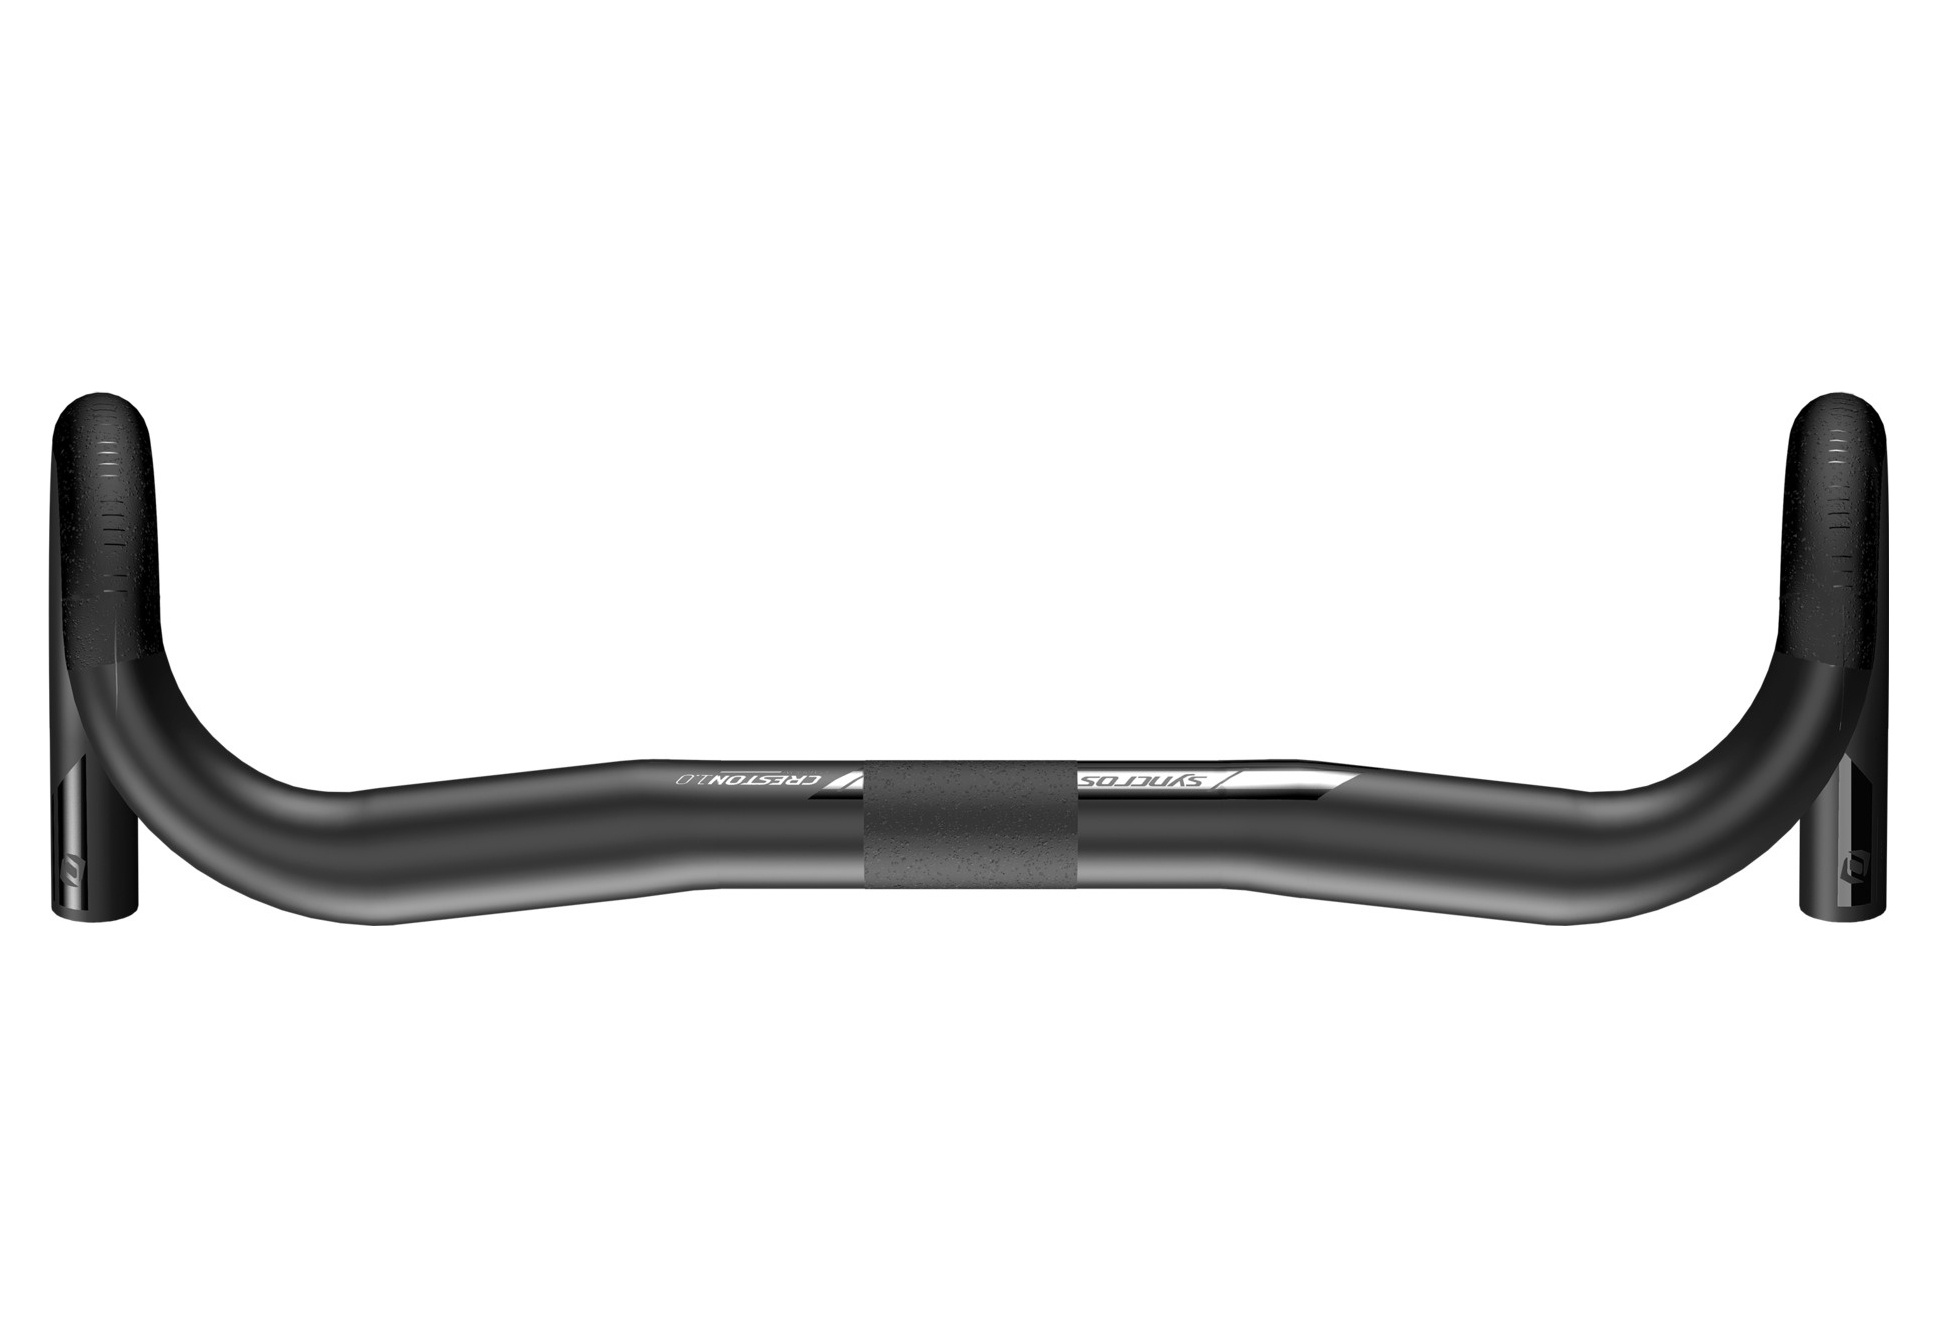 Reservedele - Cykelstyr - Syncros Creston 1.0 Flare Carbon Cykelstyr - 440mm